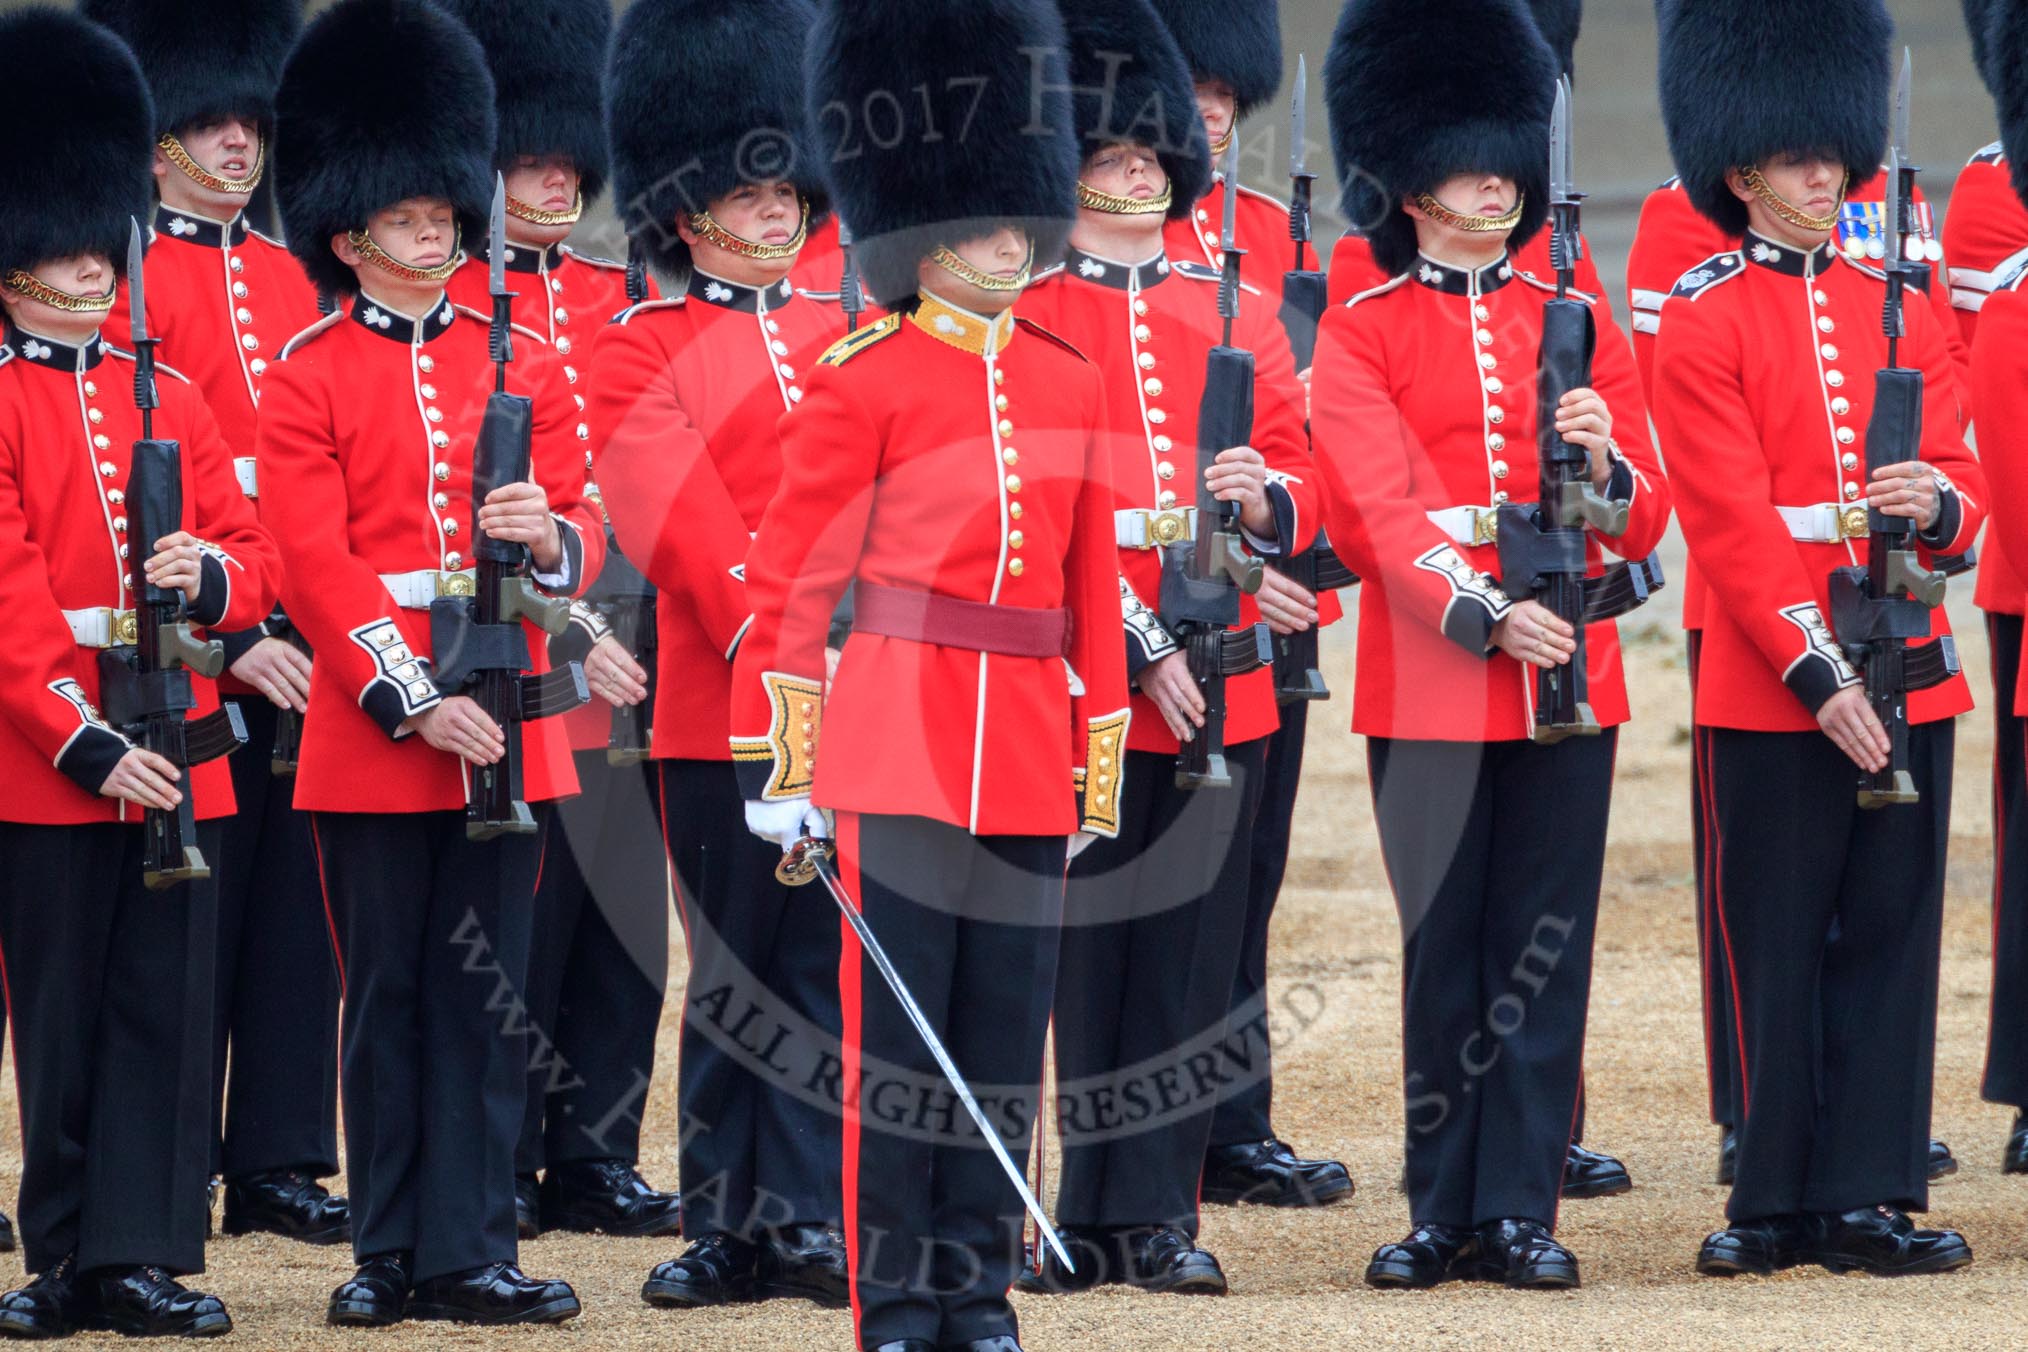 during The Colonel's Review {iptcyear4} (final rehearsal for Trooping the Colour, The Queen's Birthday Parade)  at Horse Guards Parade, Westminster, London, 2 June 2018, 11:25.